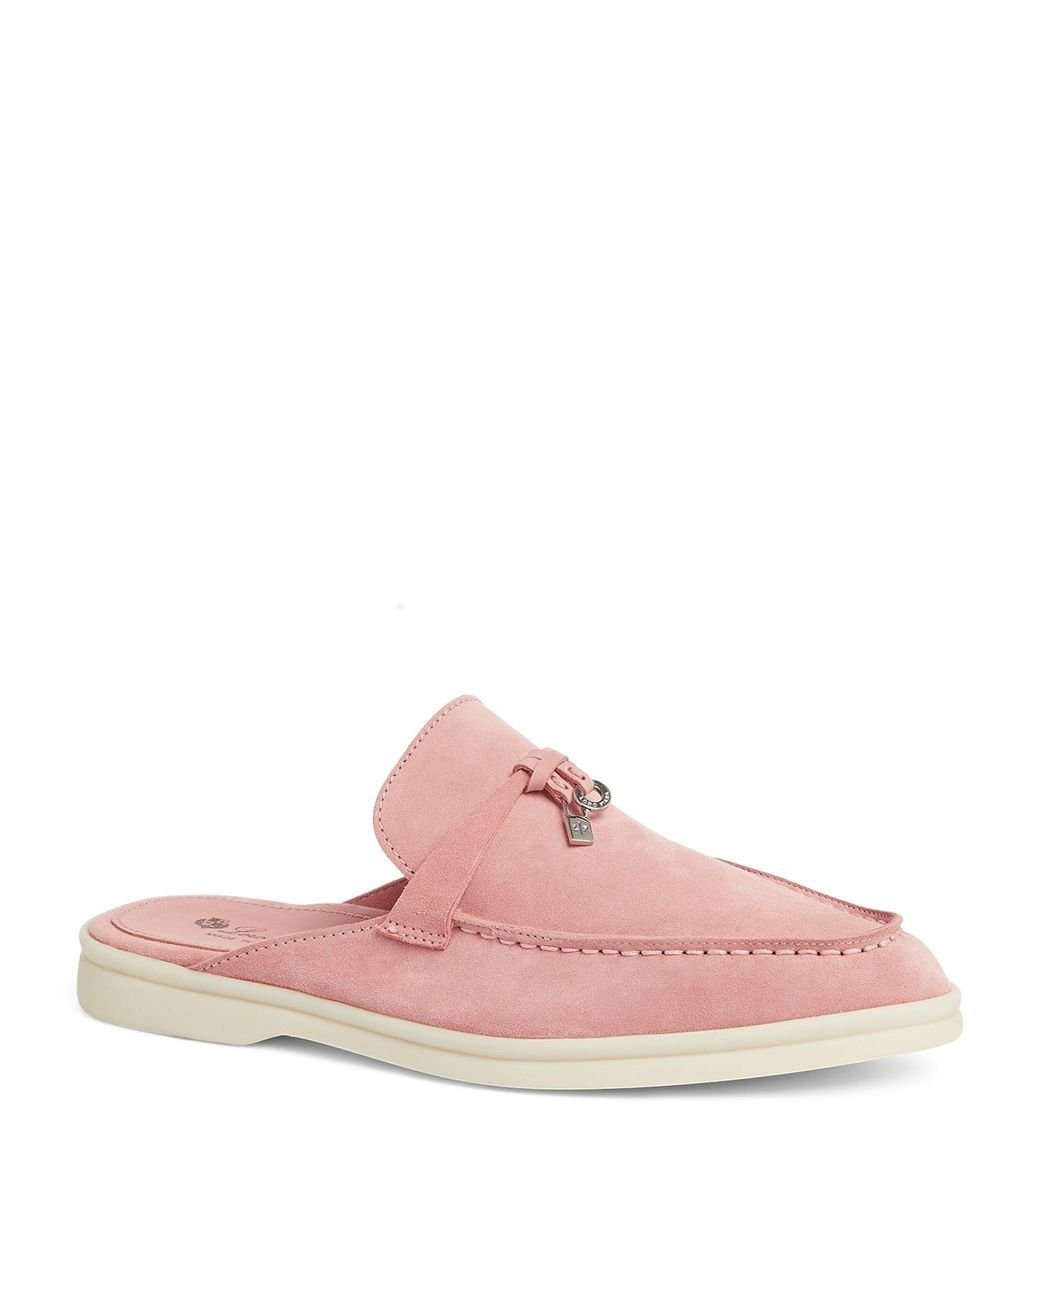 Loro Piana Suede Babouche Charms Walk Mules in Pink | Lyst